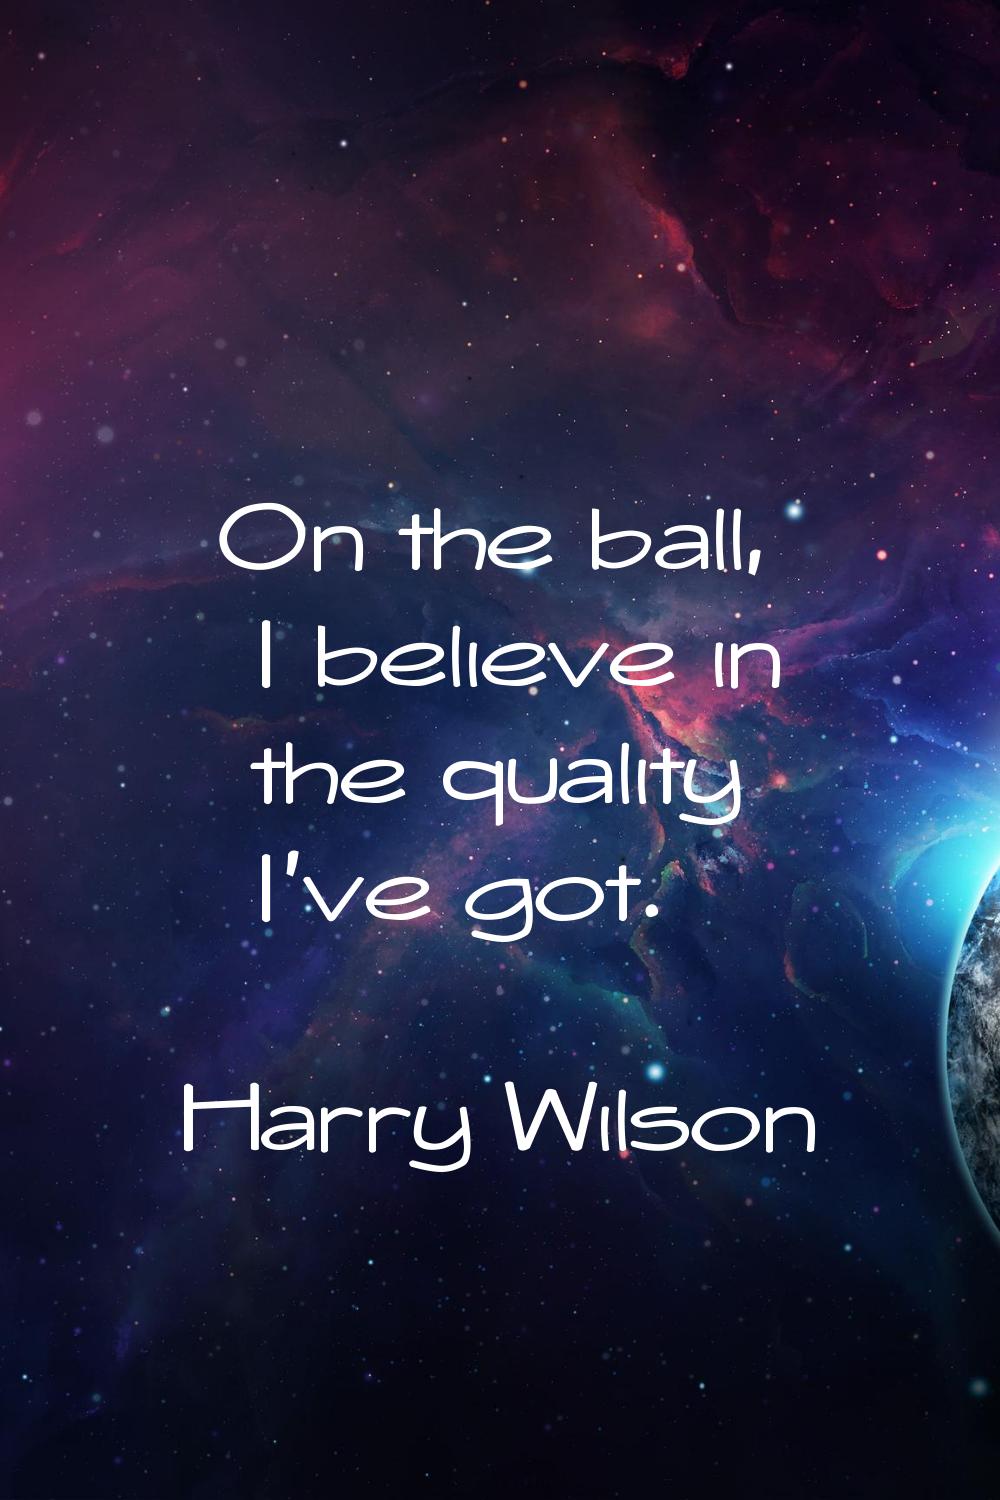 On the ball, I believe in the quality I've got.